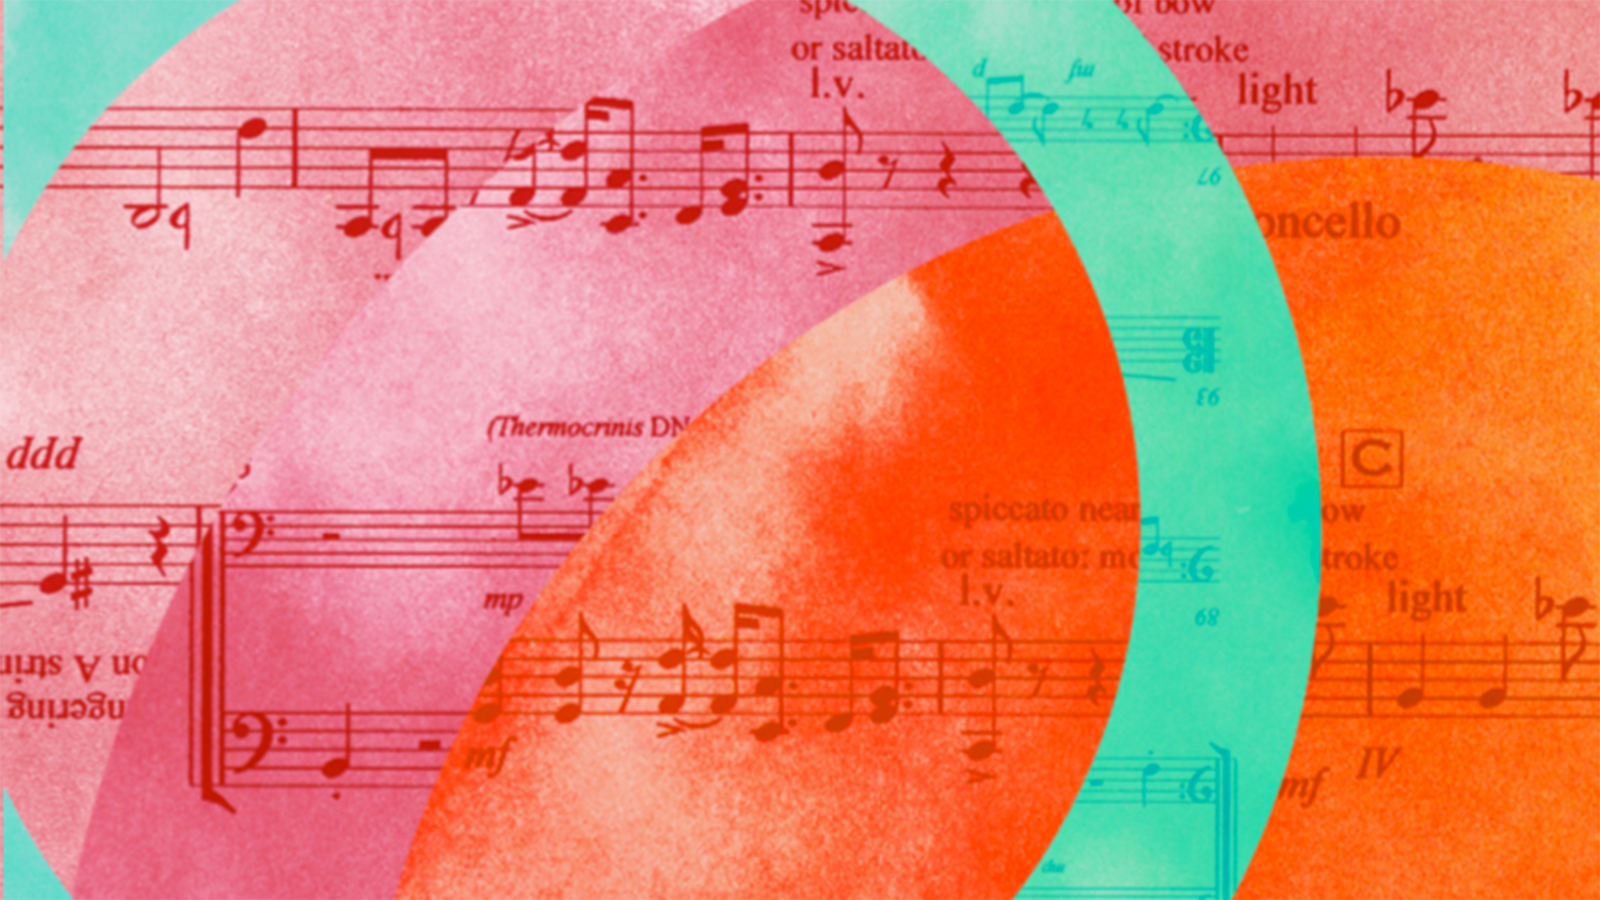 Abstract collage of colors and written music